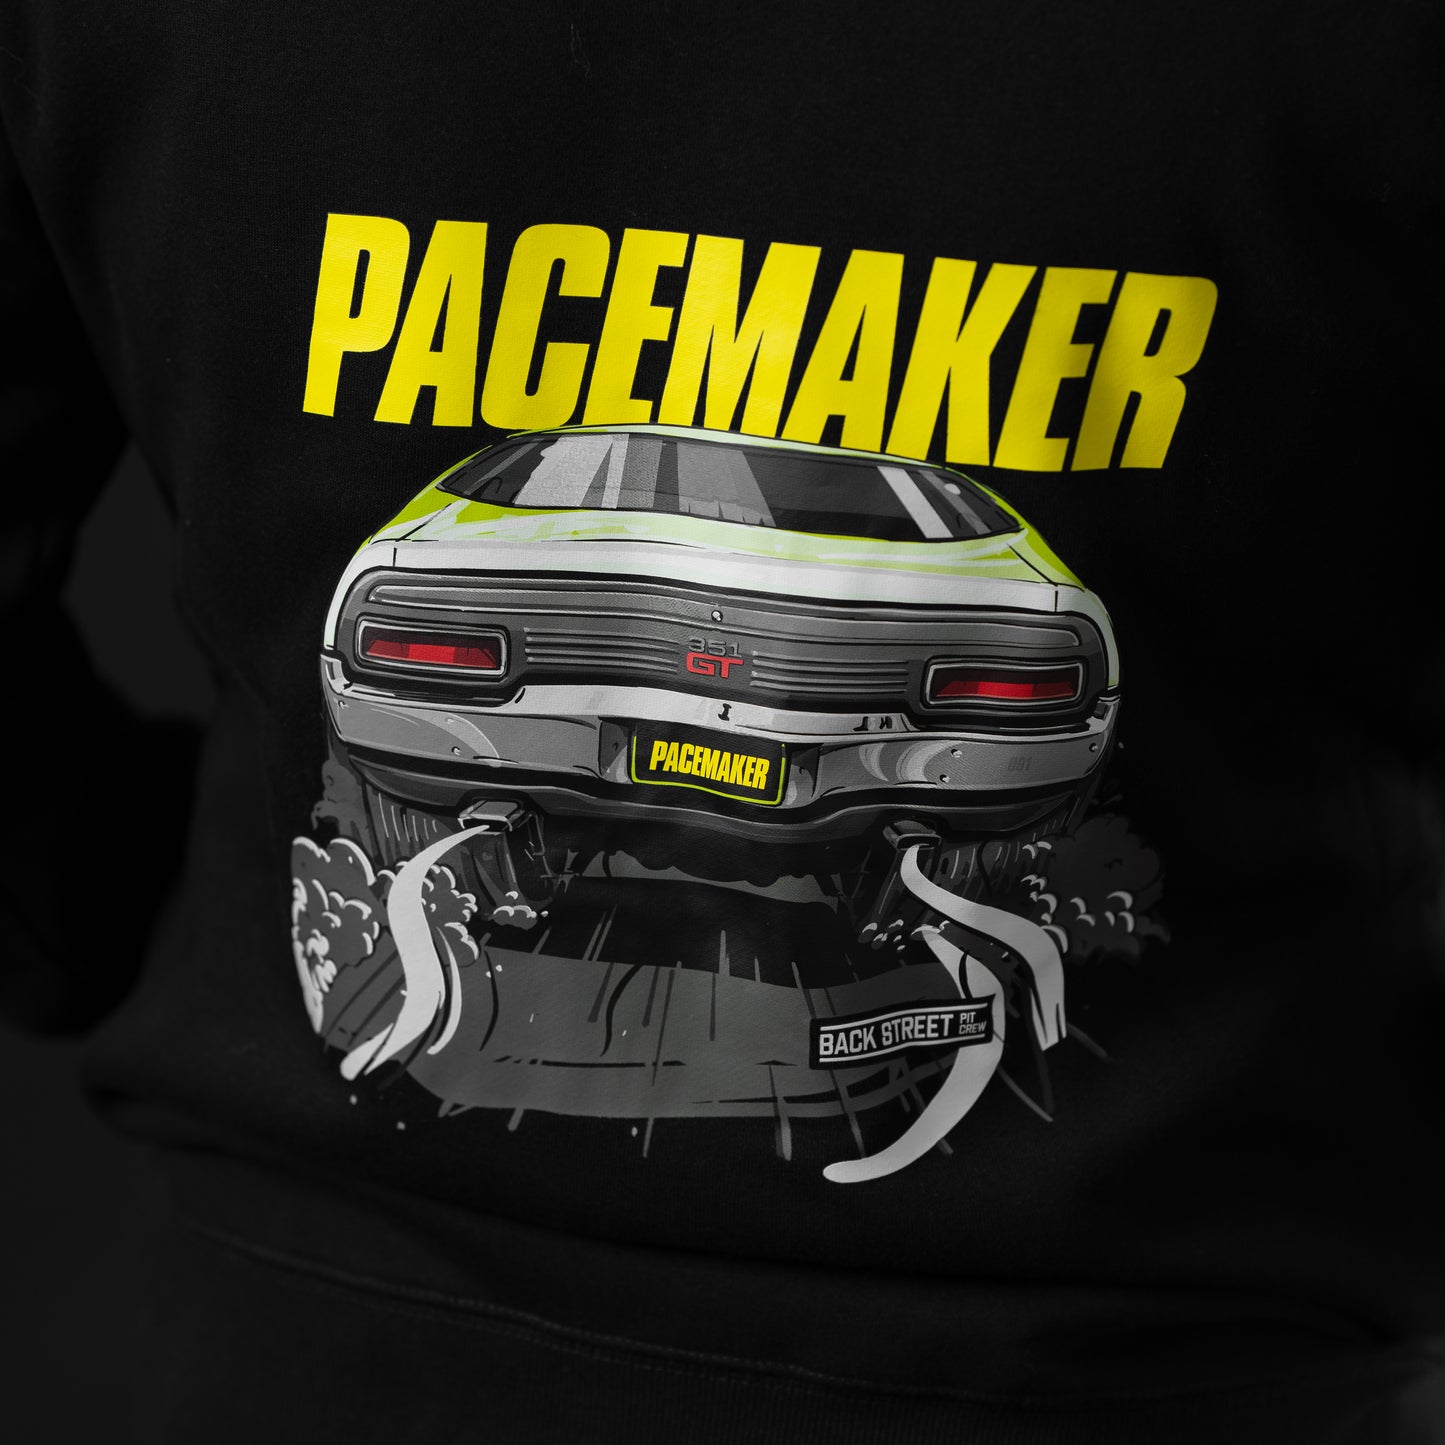 Black Pacemaker Hoodie featuring 1972 Ford Falcon XA GT 2 door hard top in Lime Green